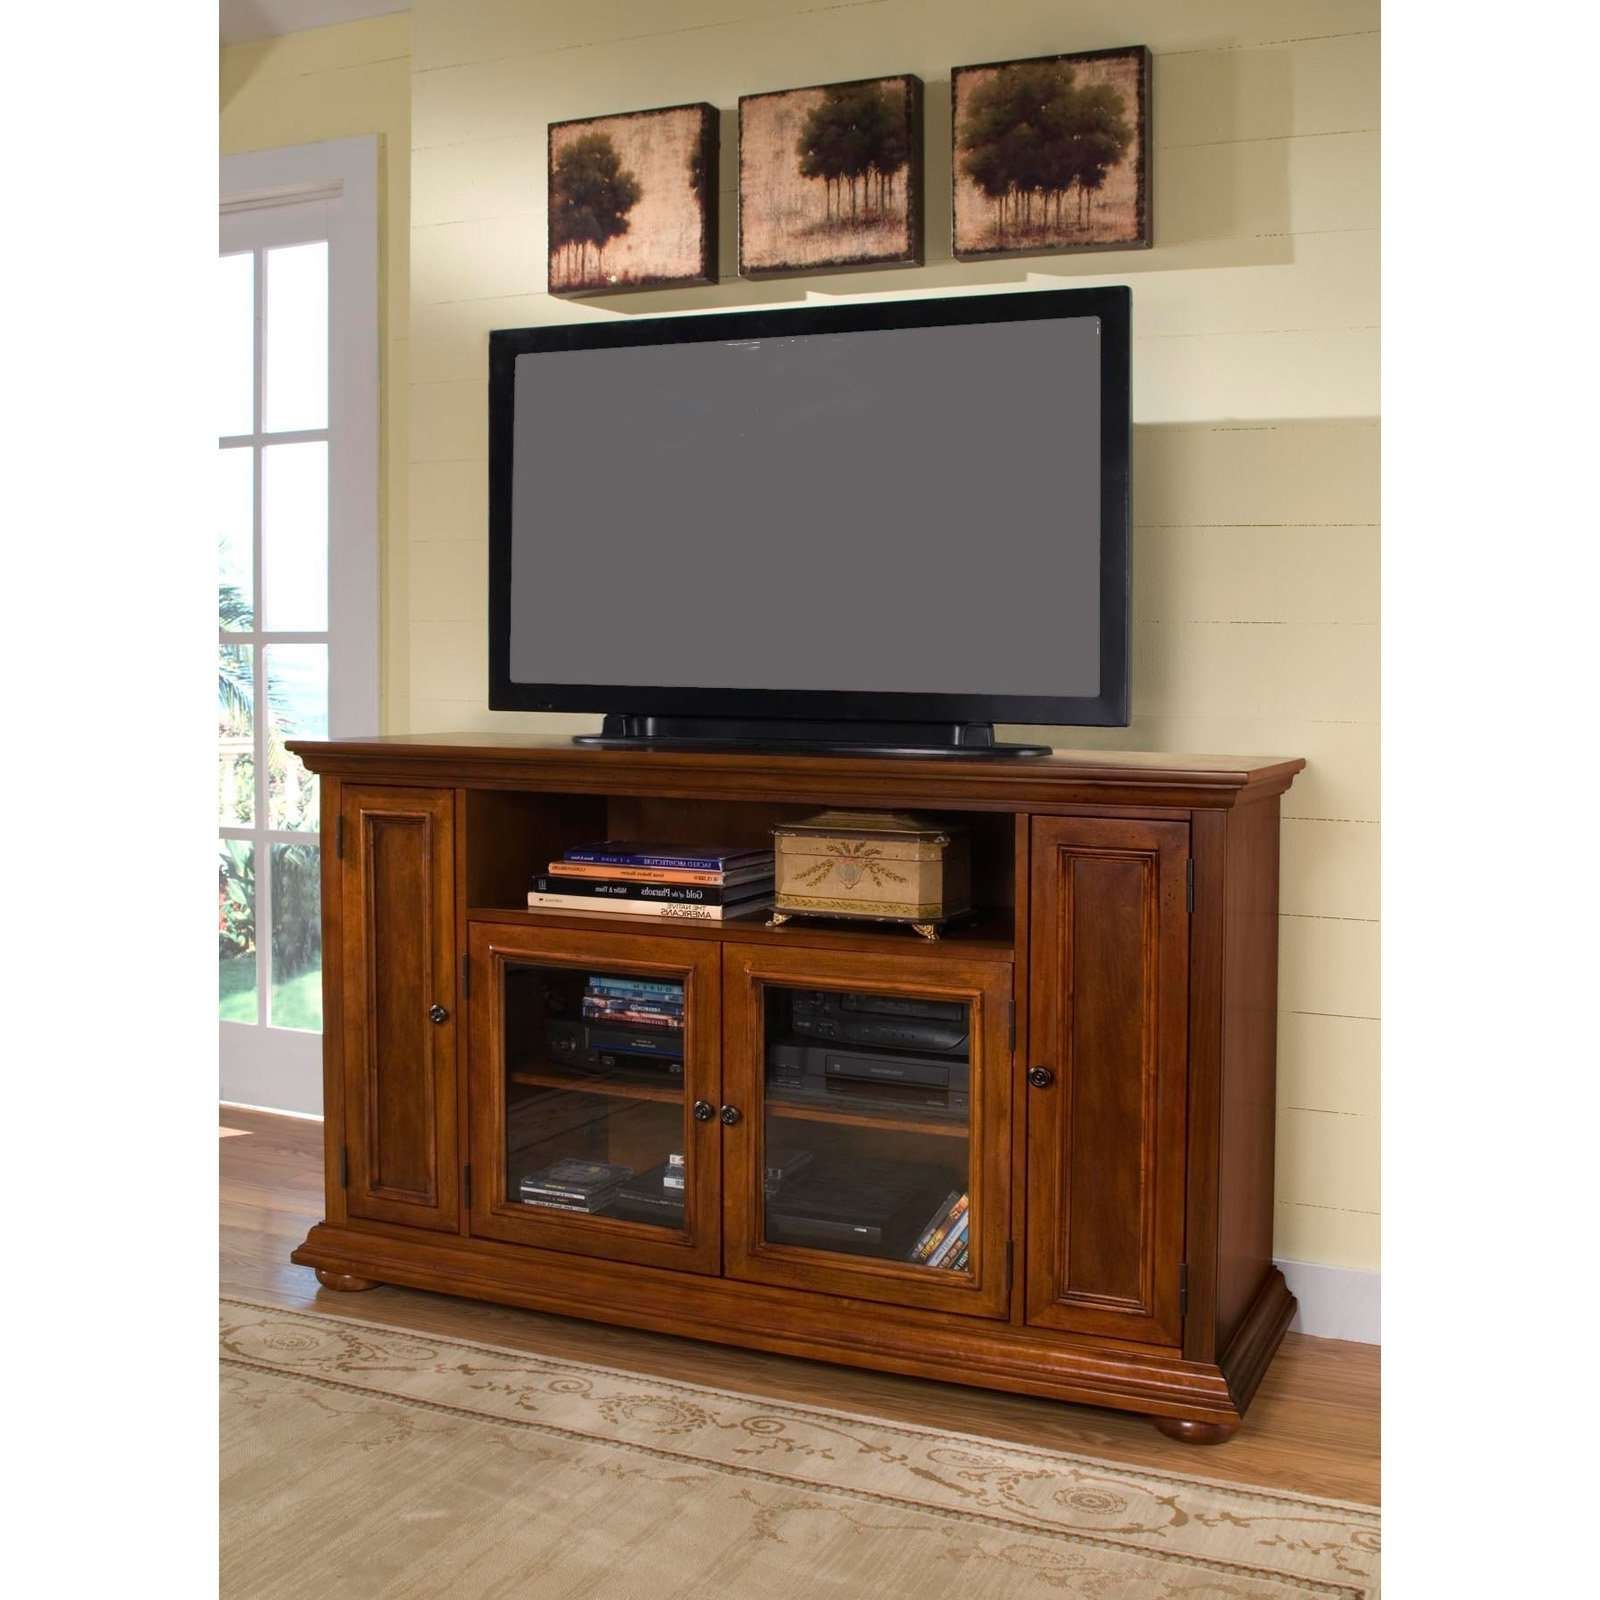 Brown Oak Tv Cabinet With Doors And Glass Doors On The Floor Pertaining To Oak Tv Cabinets For Flat Screens (Gallery 3 of 20)